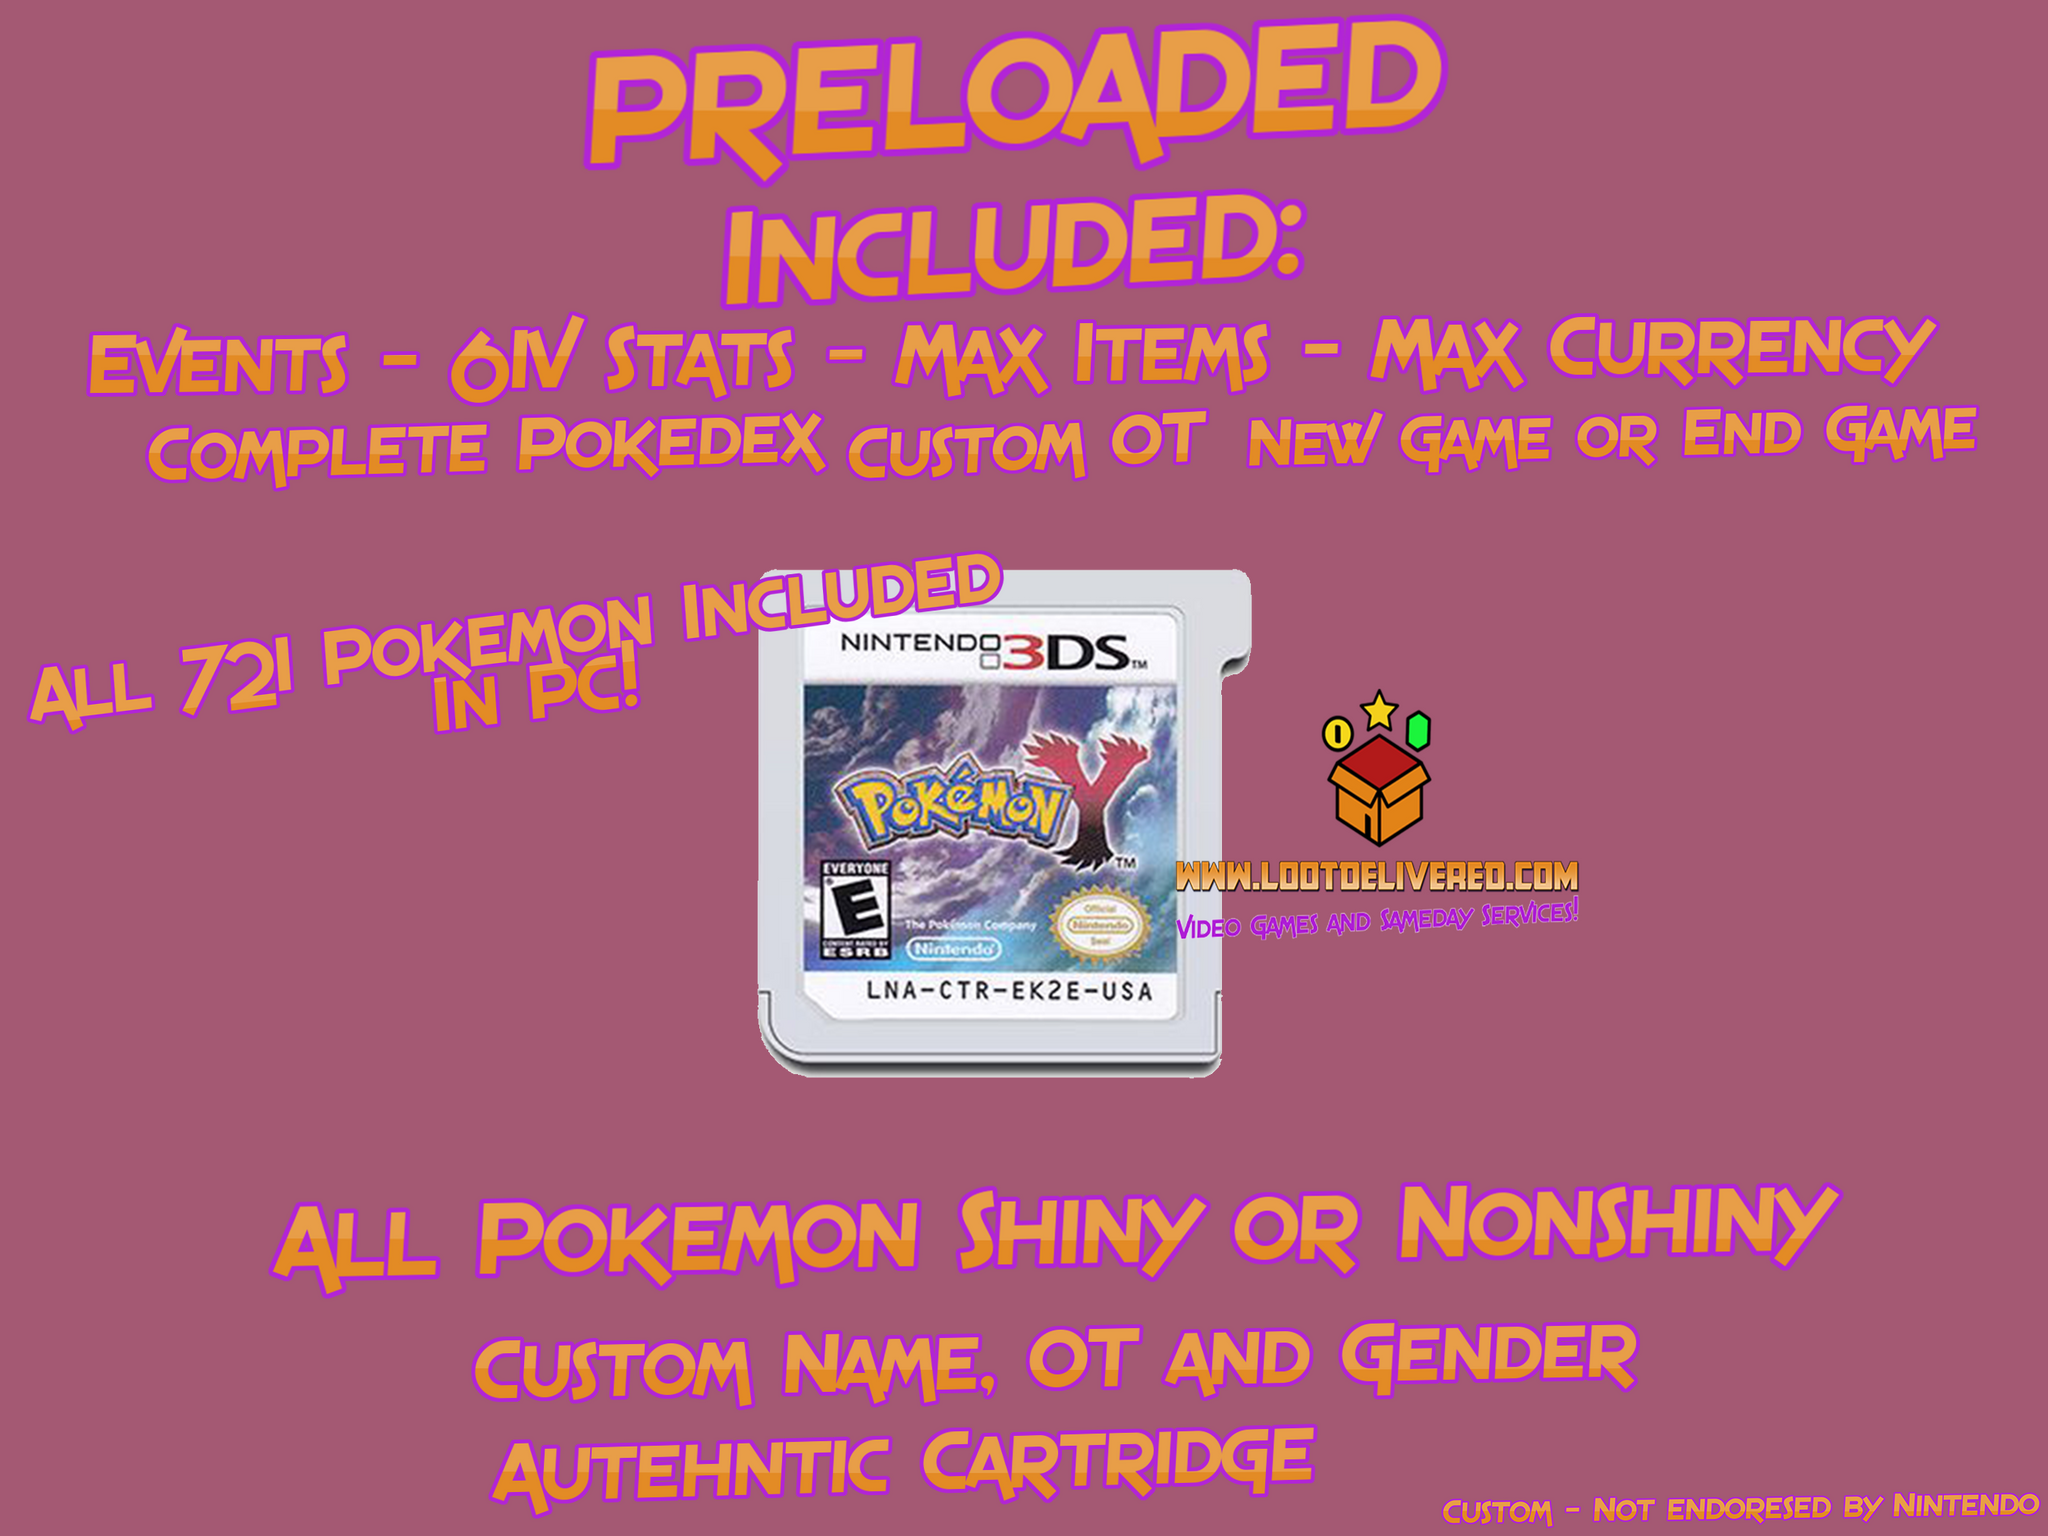 Pokemon Y Enhanced! - Loaded (Physcial + Legit With All Pokemon Event 3DS 721 Enhanced Game)